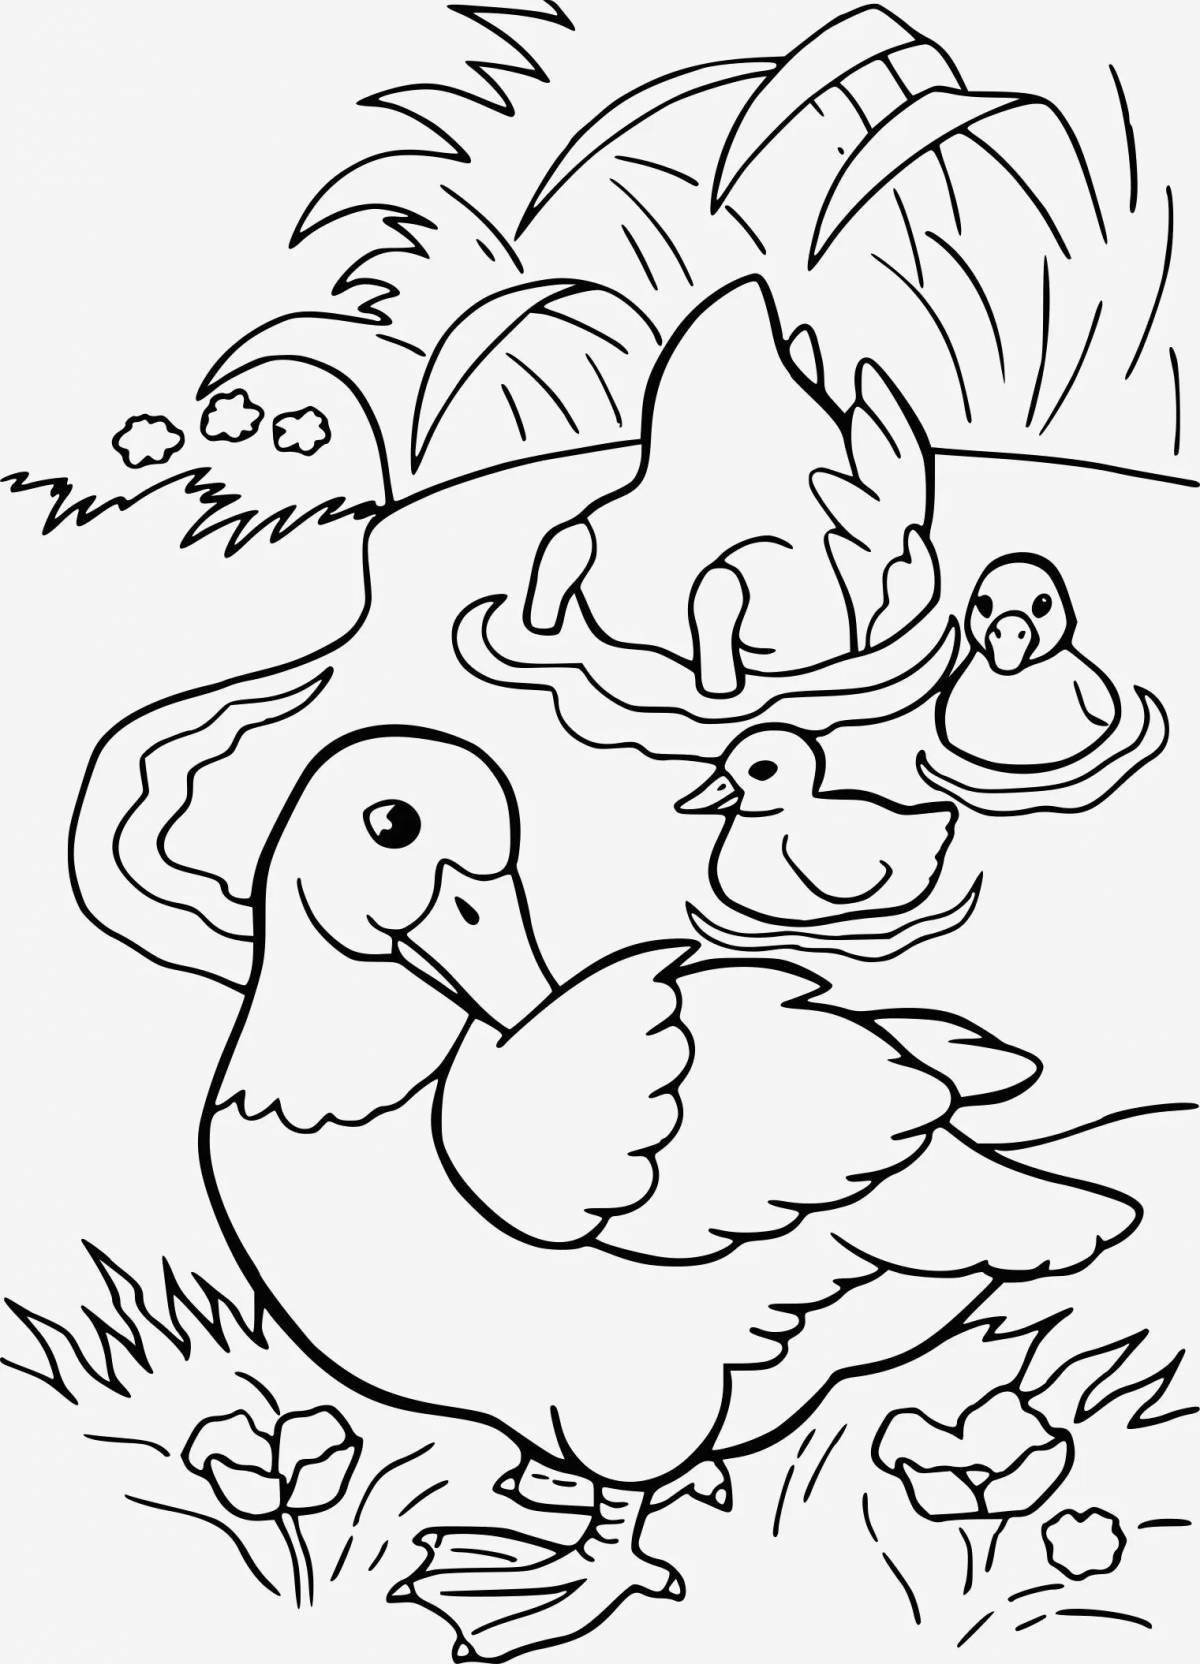 Adorable home coloring book for 5-7 year olds